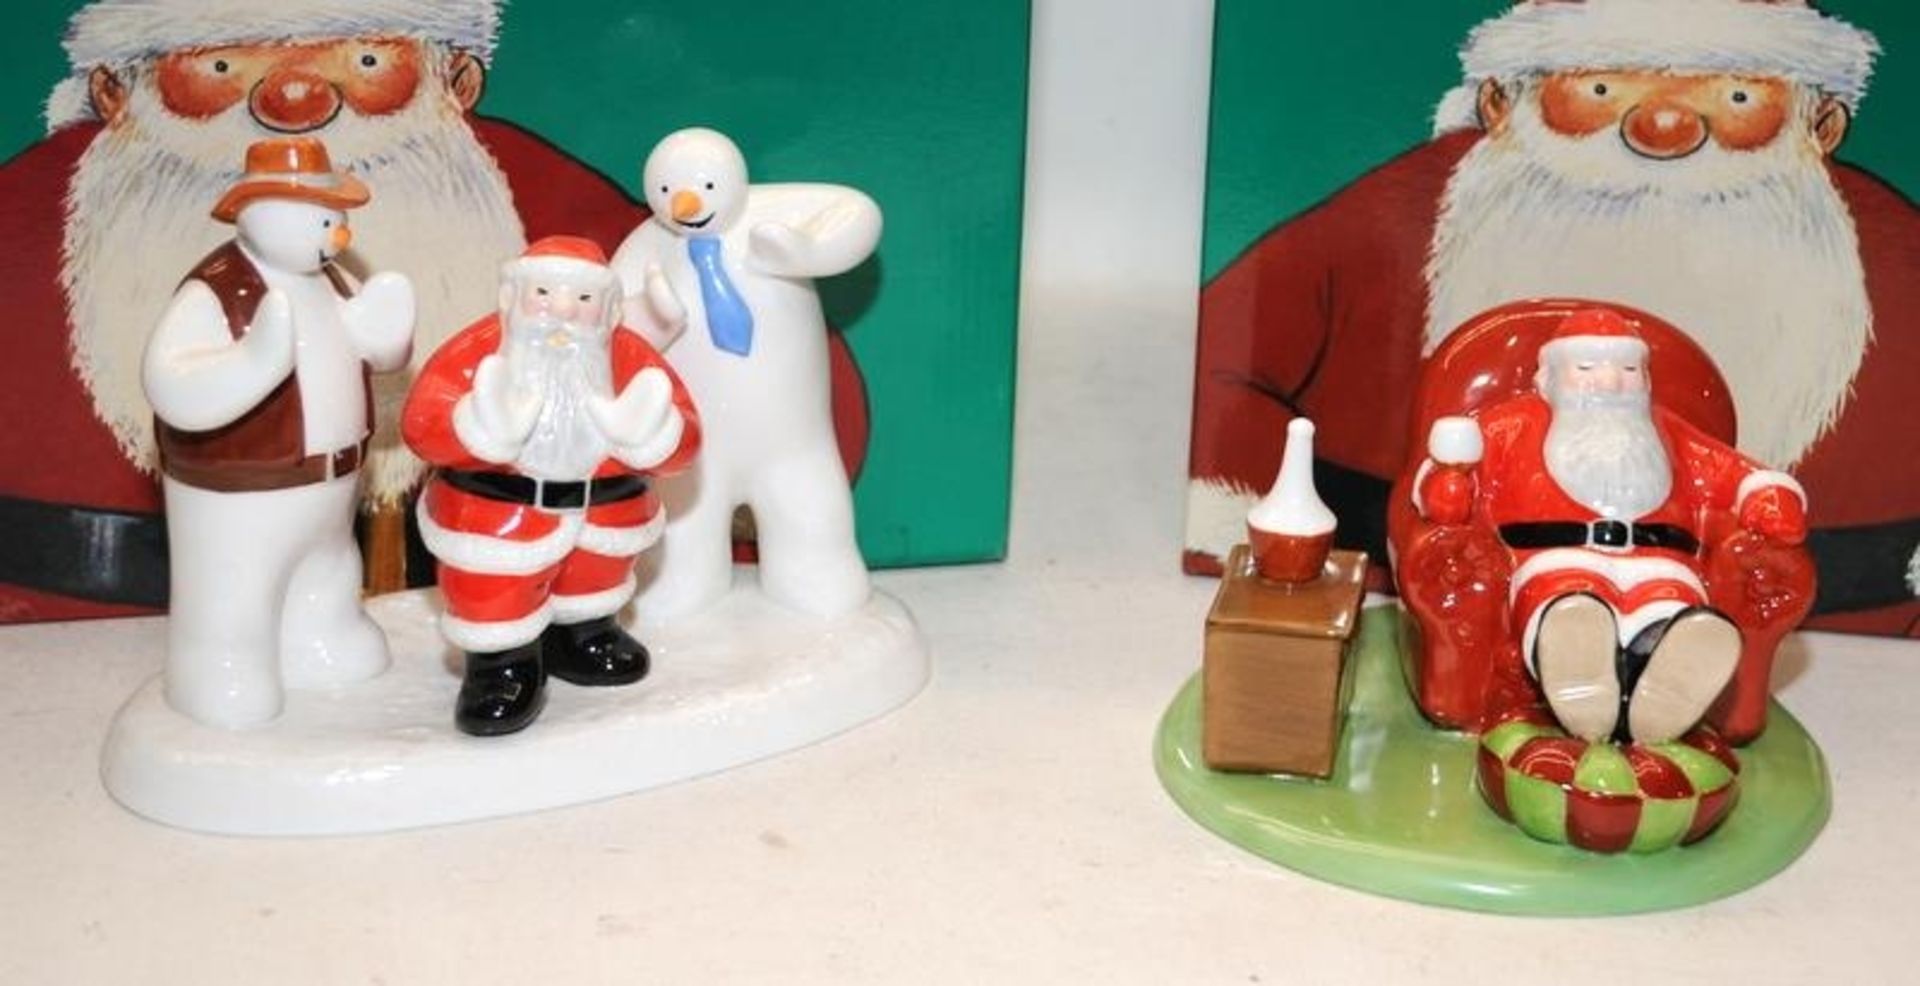 2 x Coalport Characters Raymond Briggs Father Christmas figurines: Line Dancing c/w Time for a Break